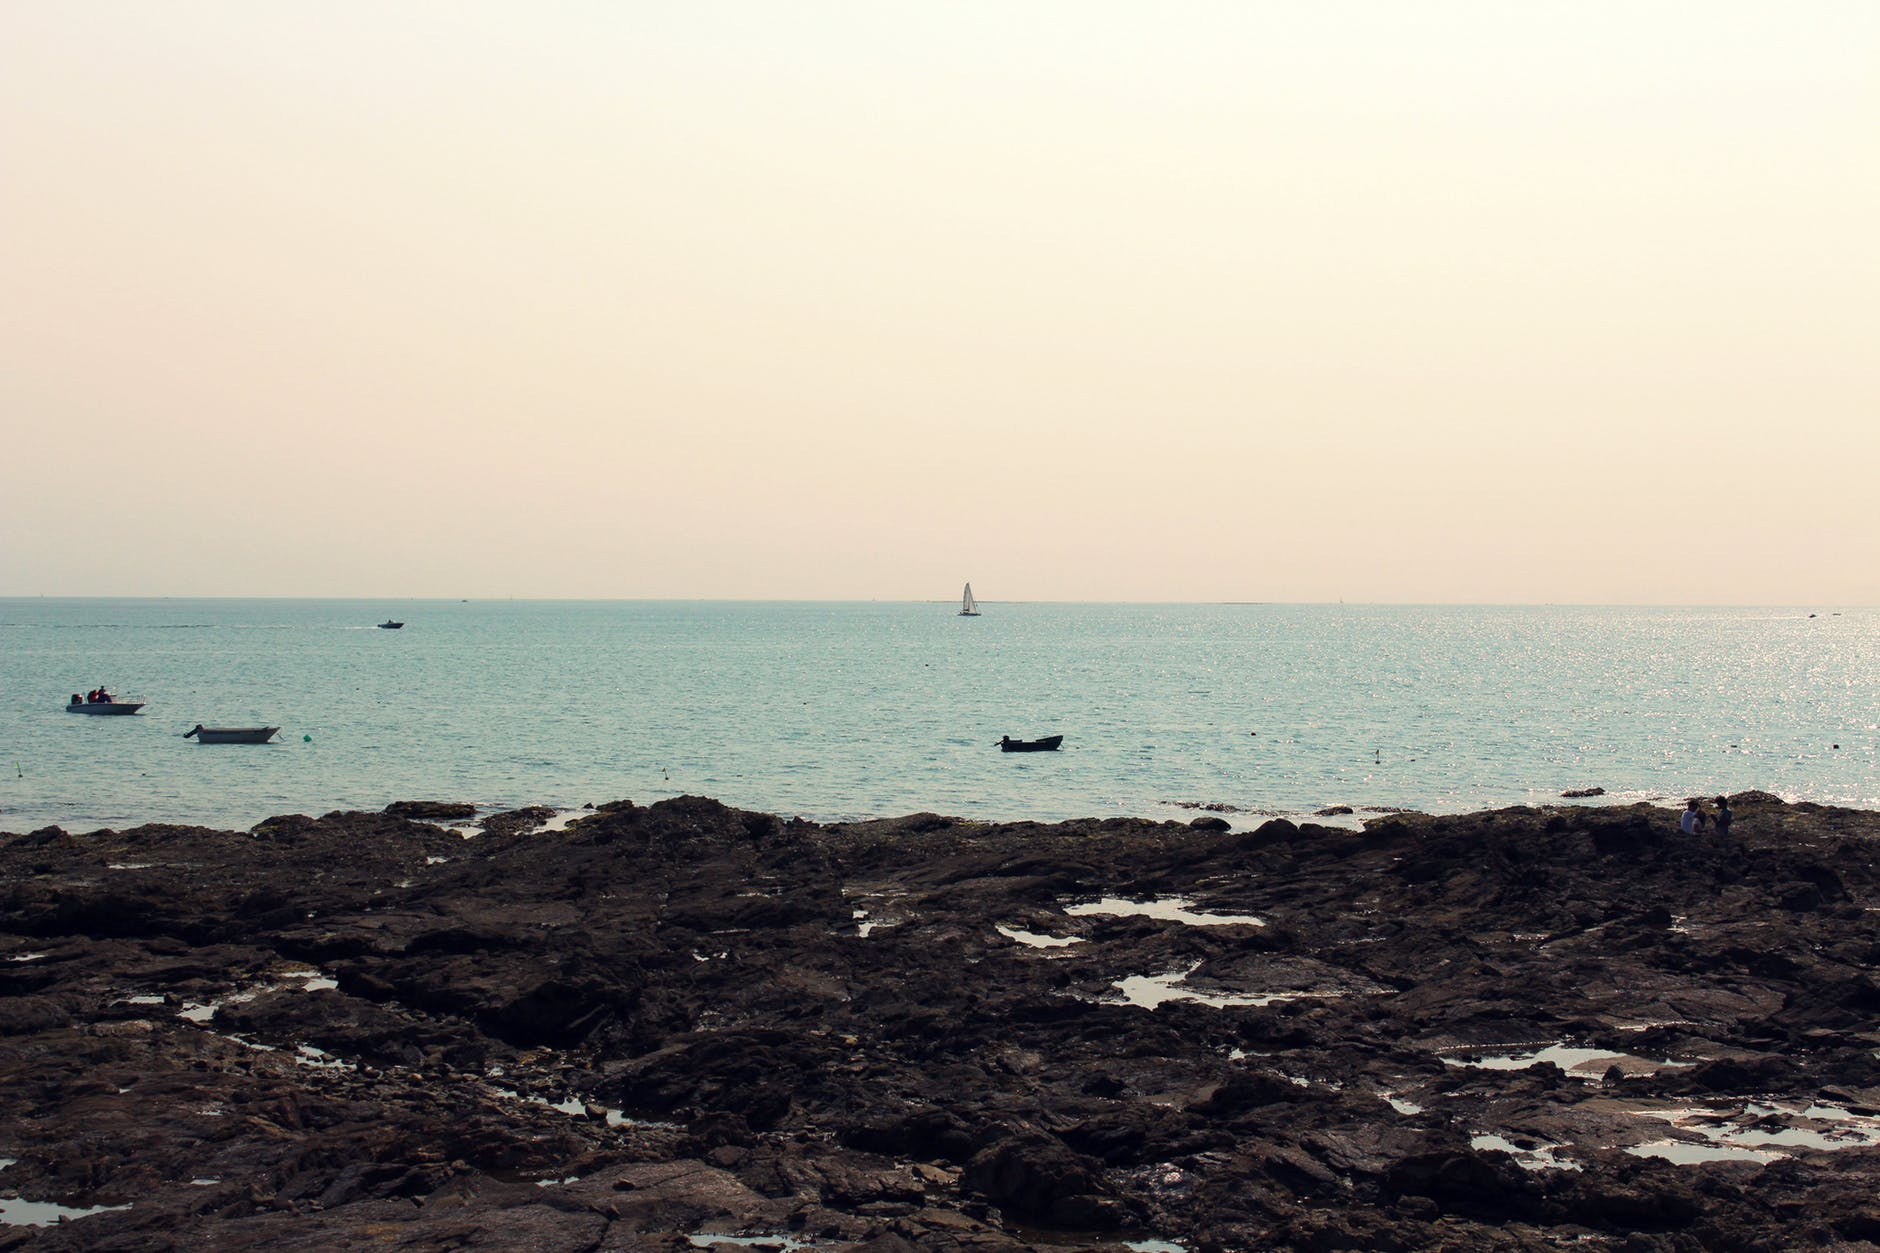 photograph of a rocky beach with sailboats in the distance